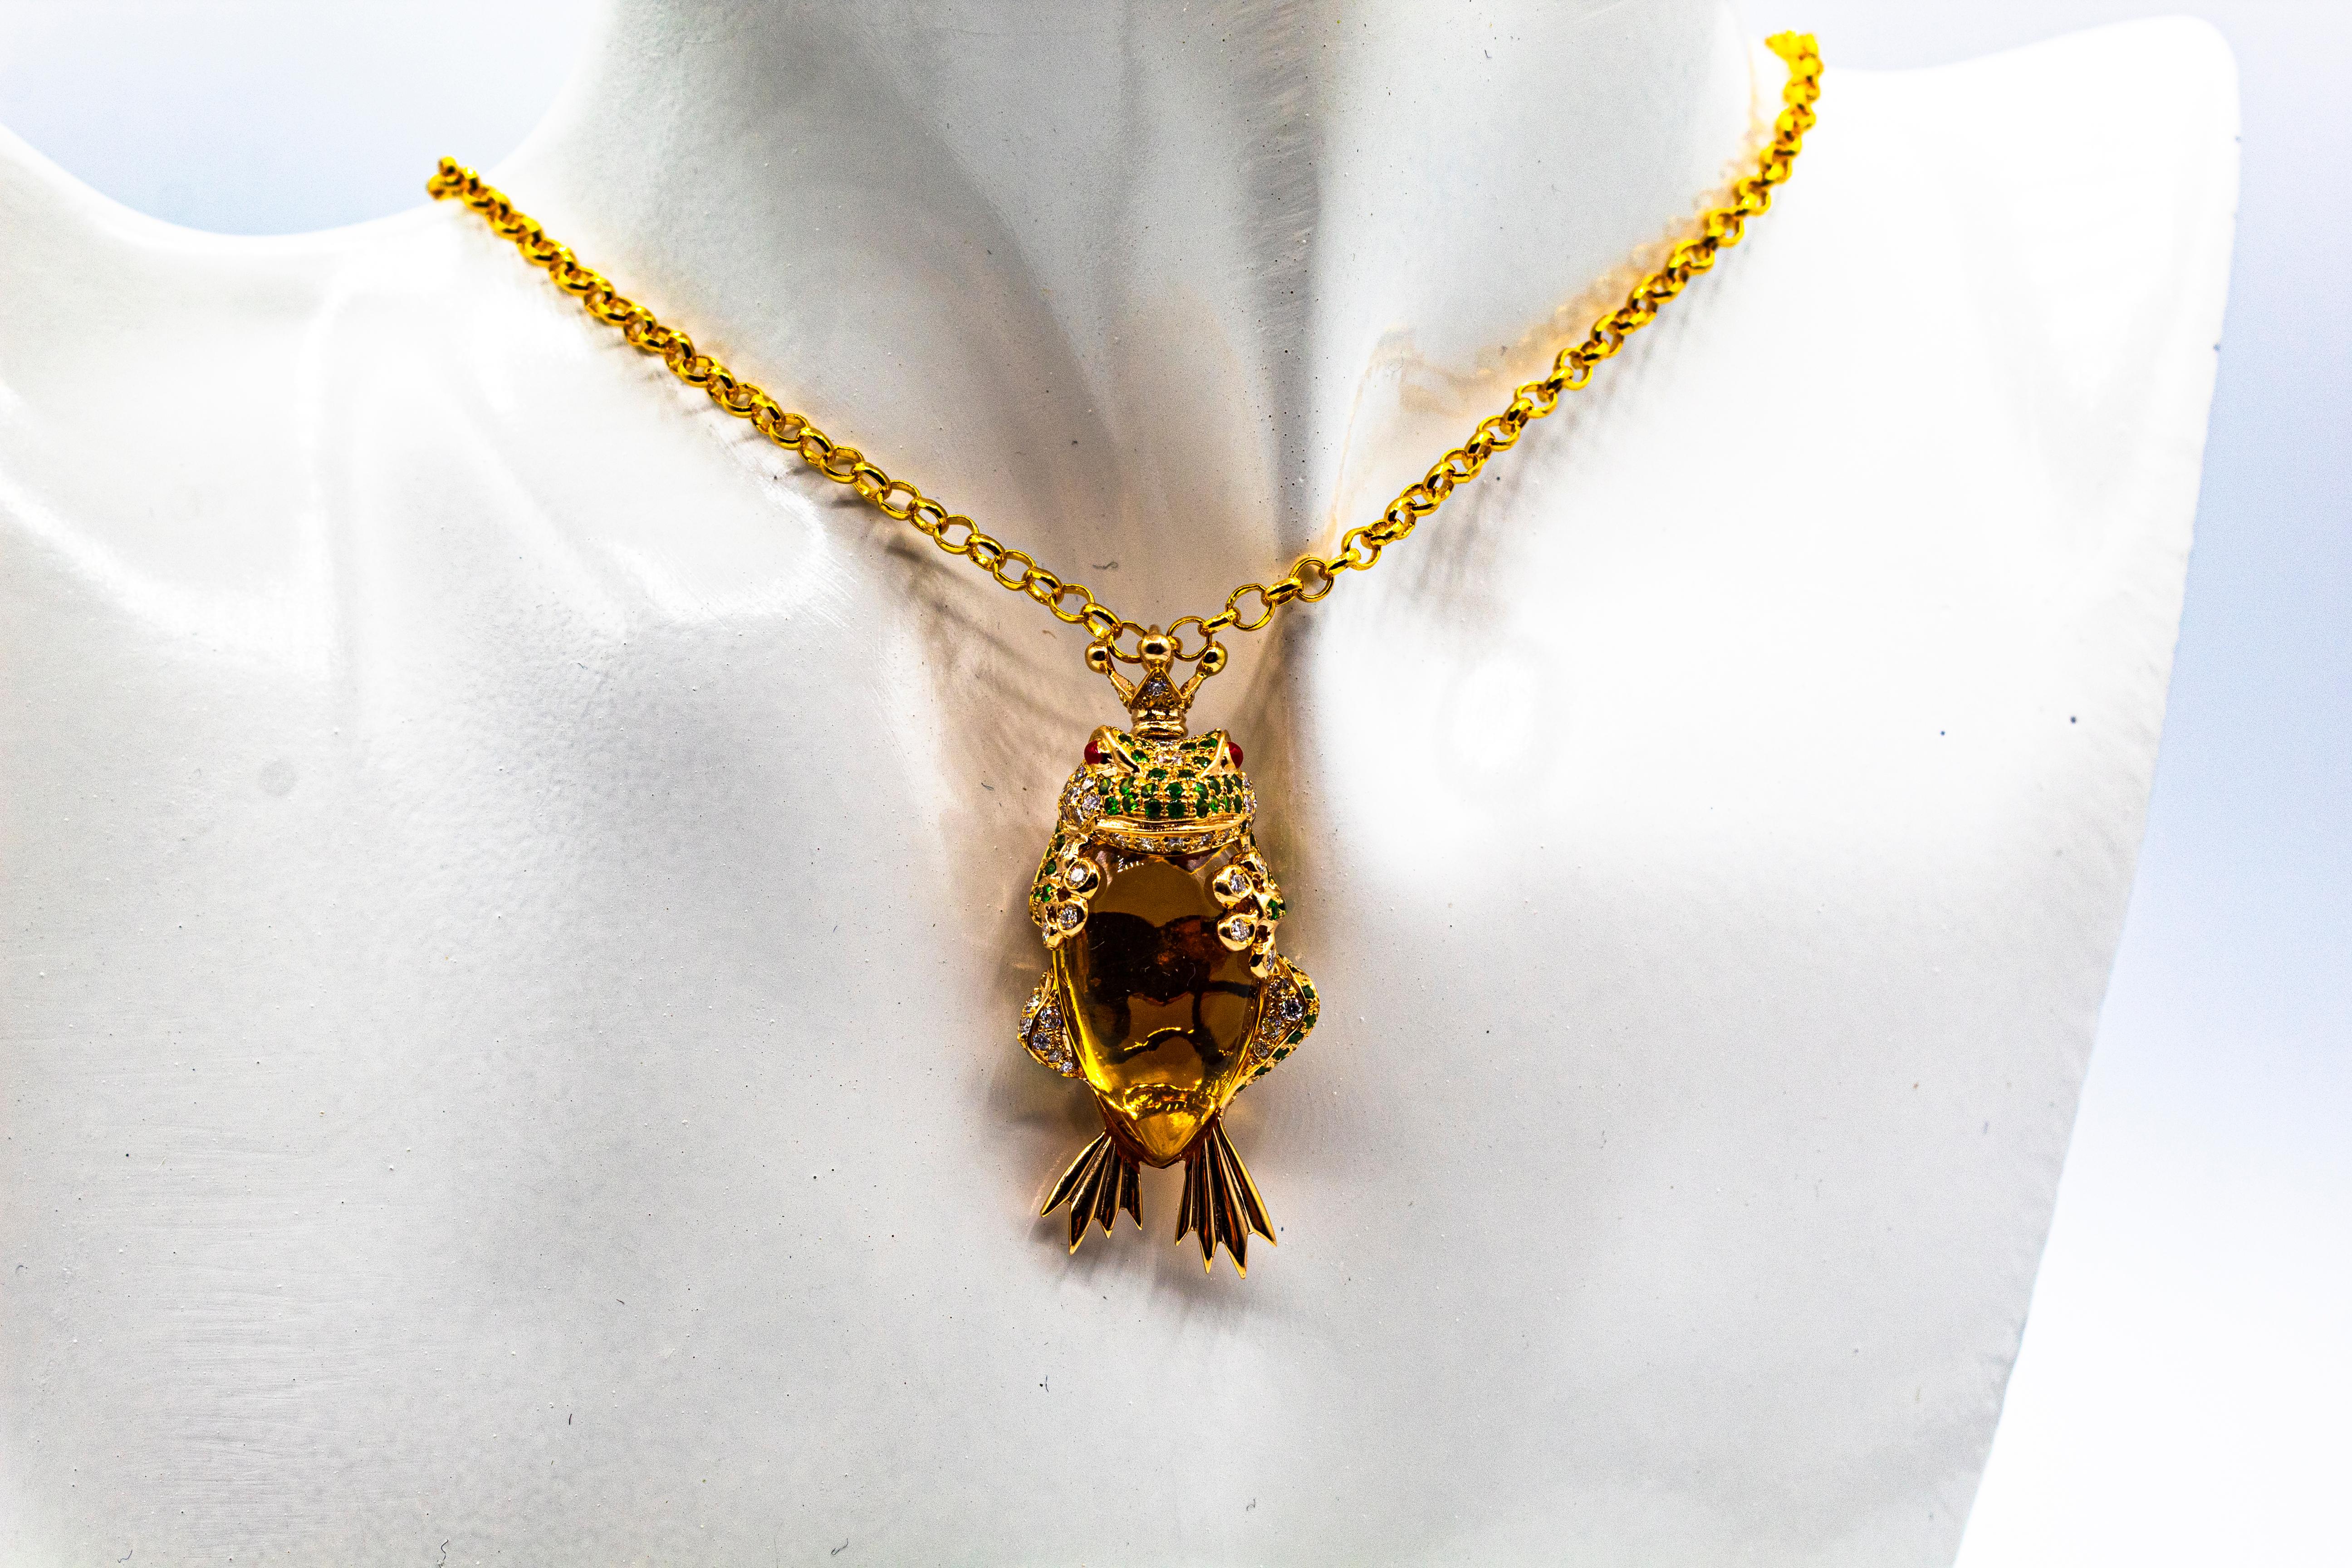 This Necklace is made of 14K Yellow Gold.
This Necklace has 0.80 Carats of White Brilliant Cut Diamonds.
This Necklace has 1.30 Carats of Tsavorite.
This Necklace has a 12.50 Carats Citrine.
This Necklace has Enamel.

This Pendant has its matching